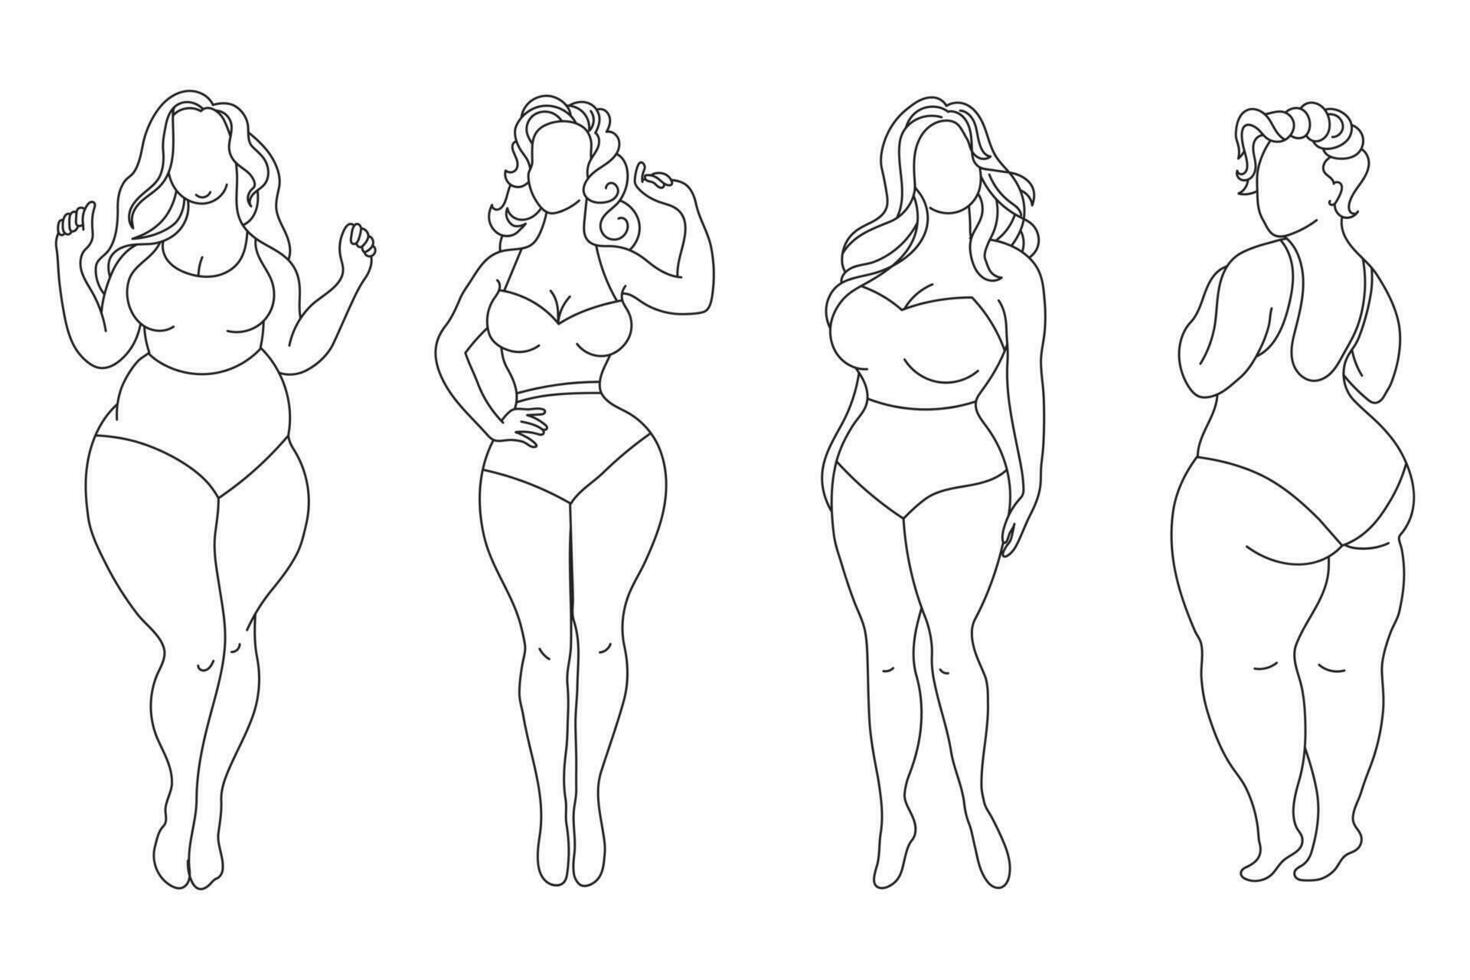 Silhouettes of women with different figures, set, sketch. Body positivity concept. Line art, vector